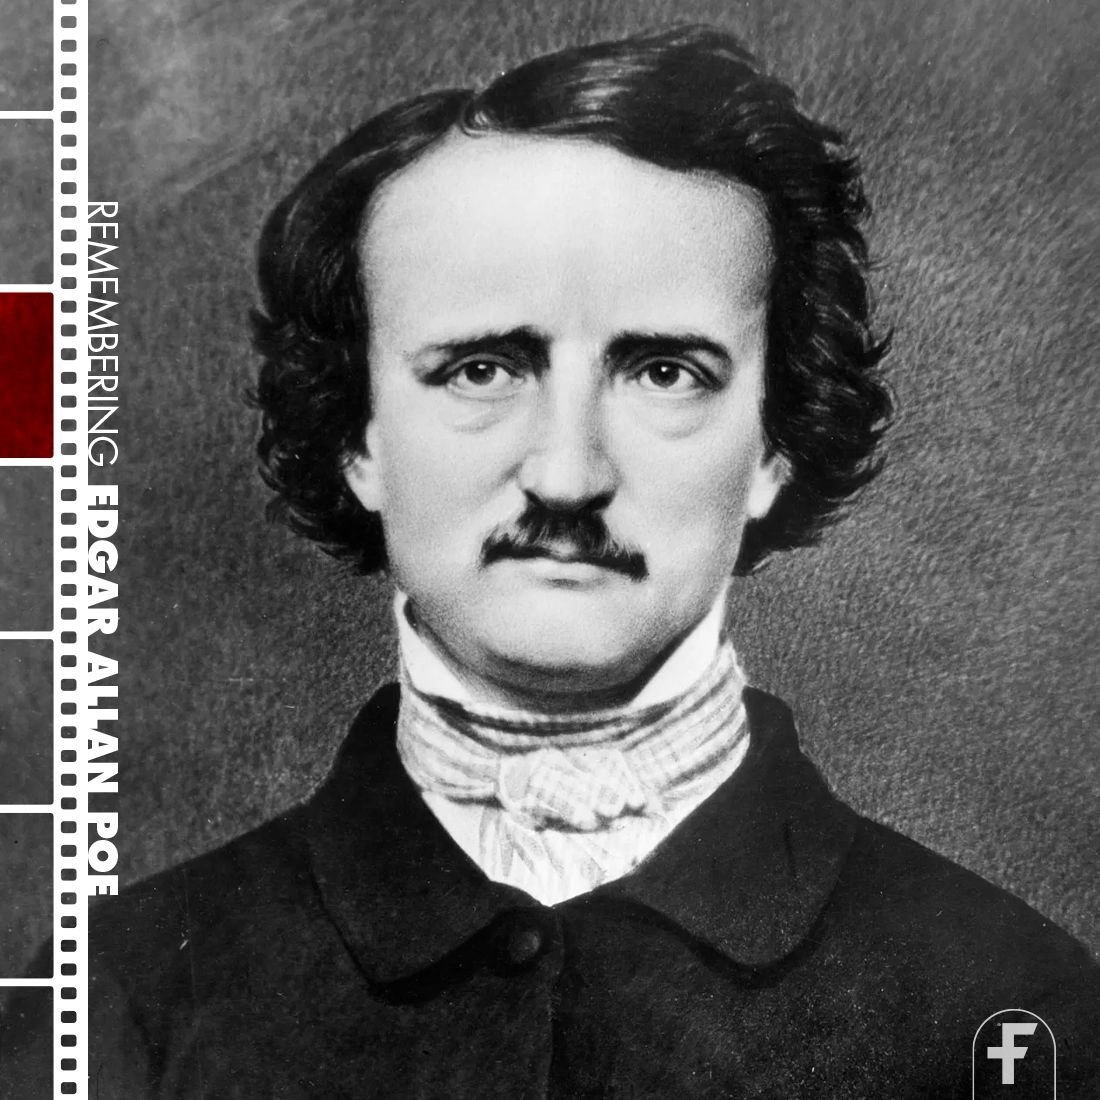 On his birthday, we'd like to remember the one and only Edgar Allan Poe.